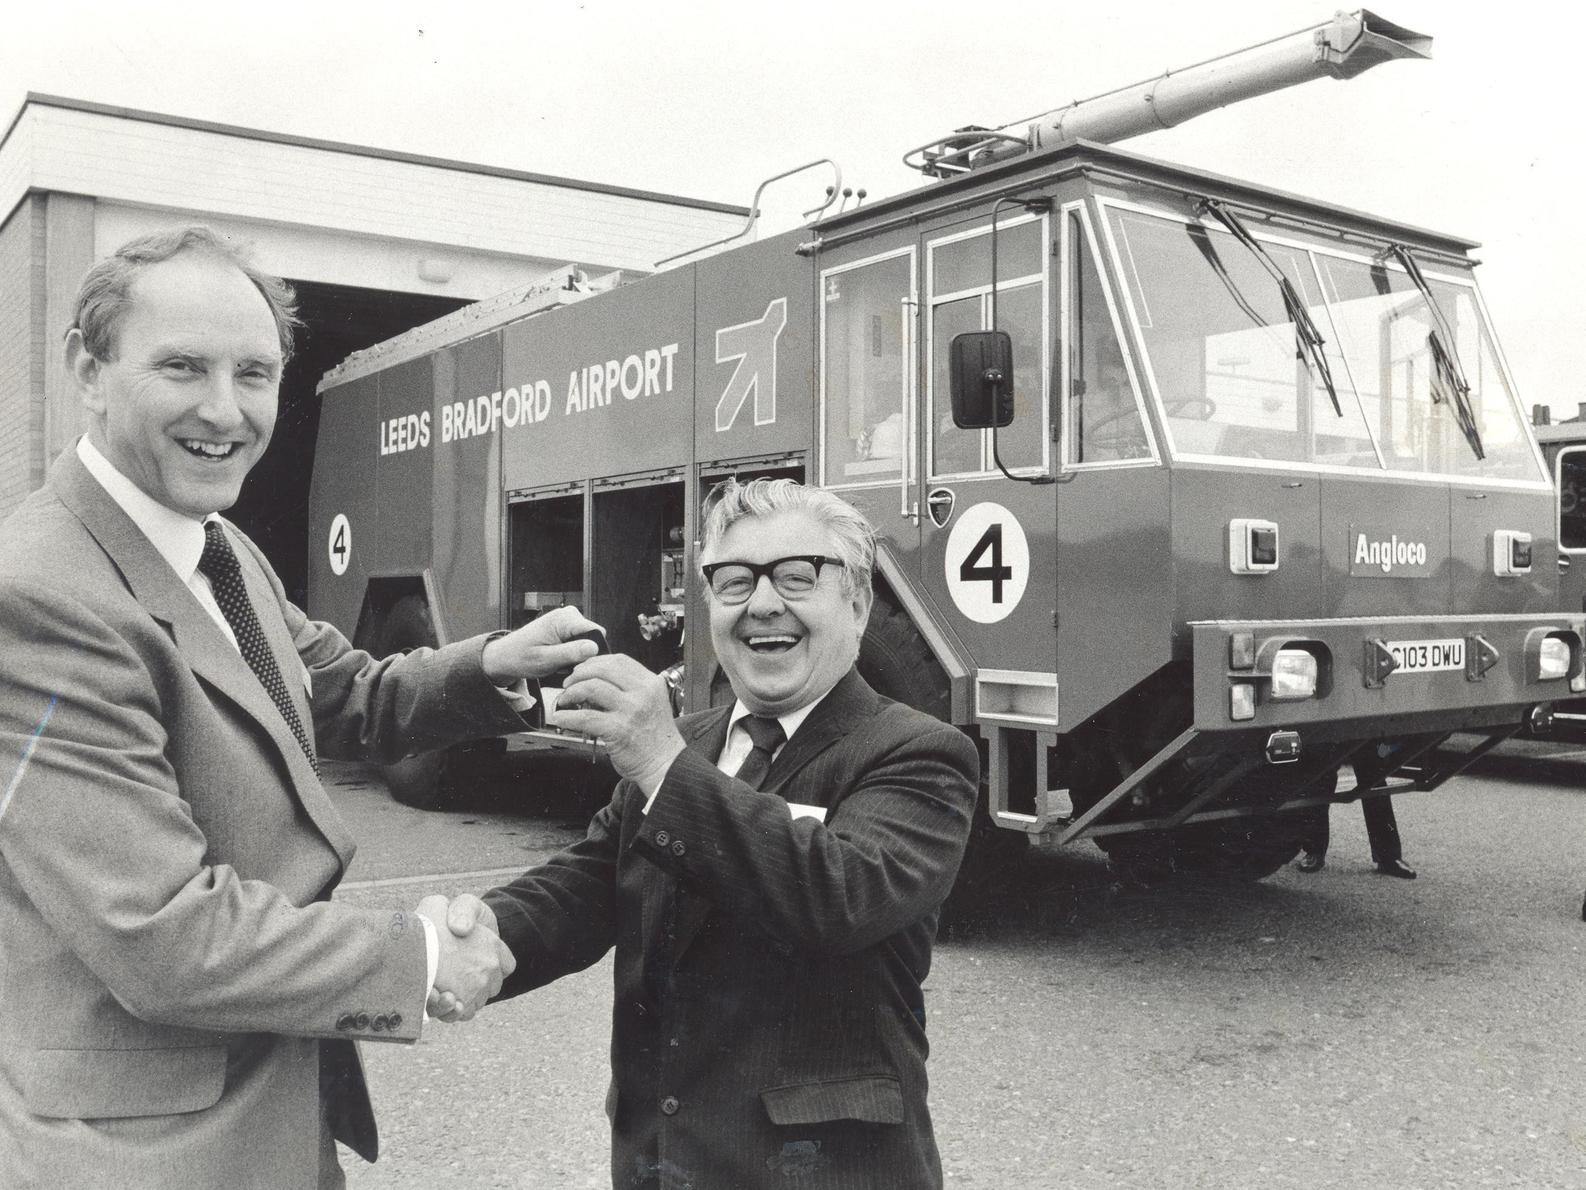 The airport took receipt of a new crash tender. Pictured is Bill Brown (left) managing director of Angloco handing over the keys to Coun Danny Coughlin, deputy chairman of Leeds Bradford Airport Joint Committee.